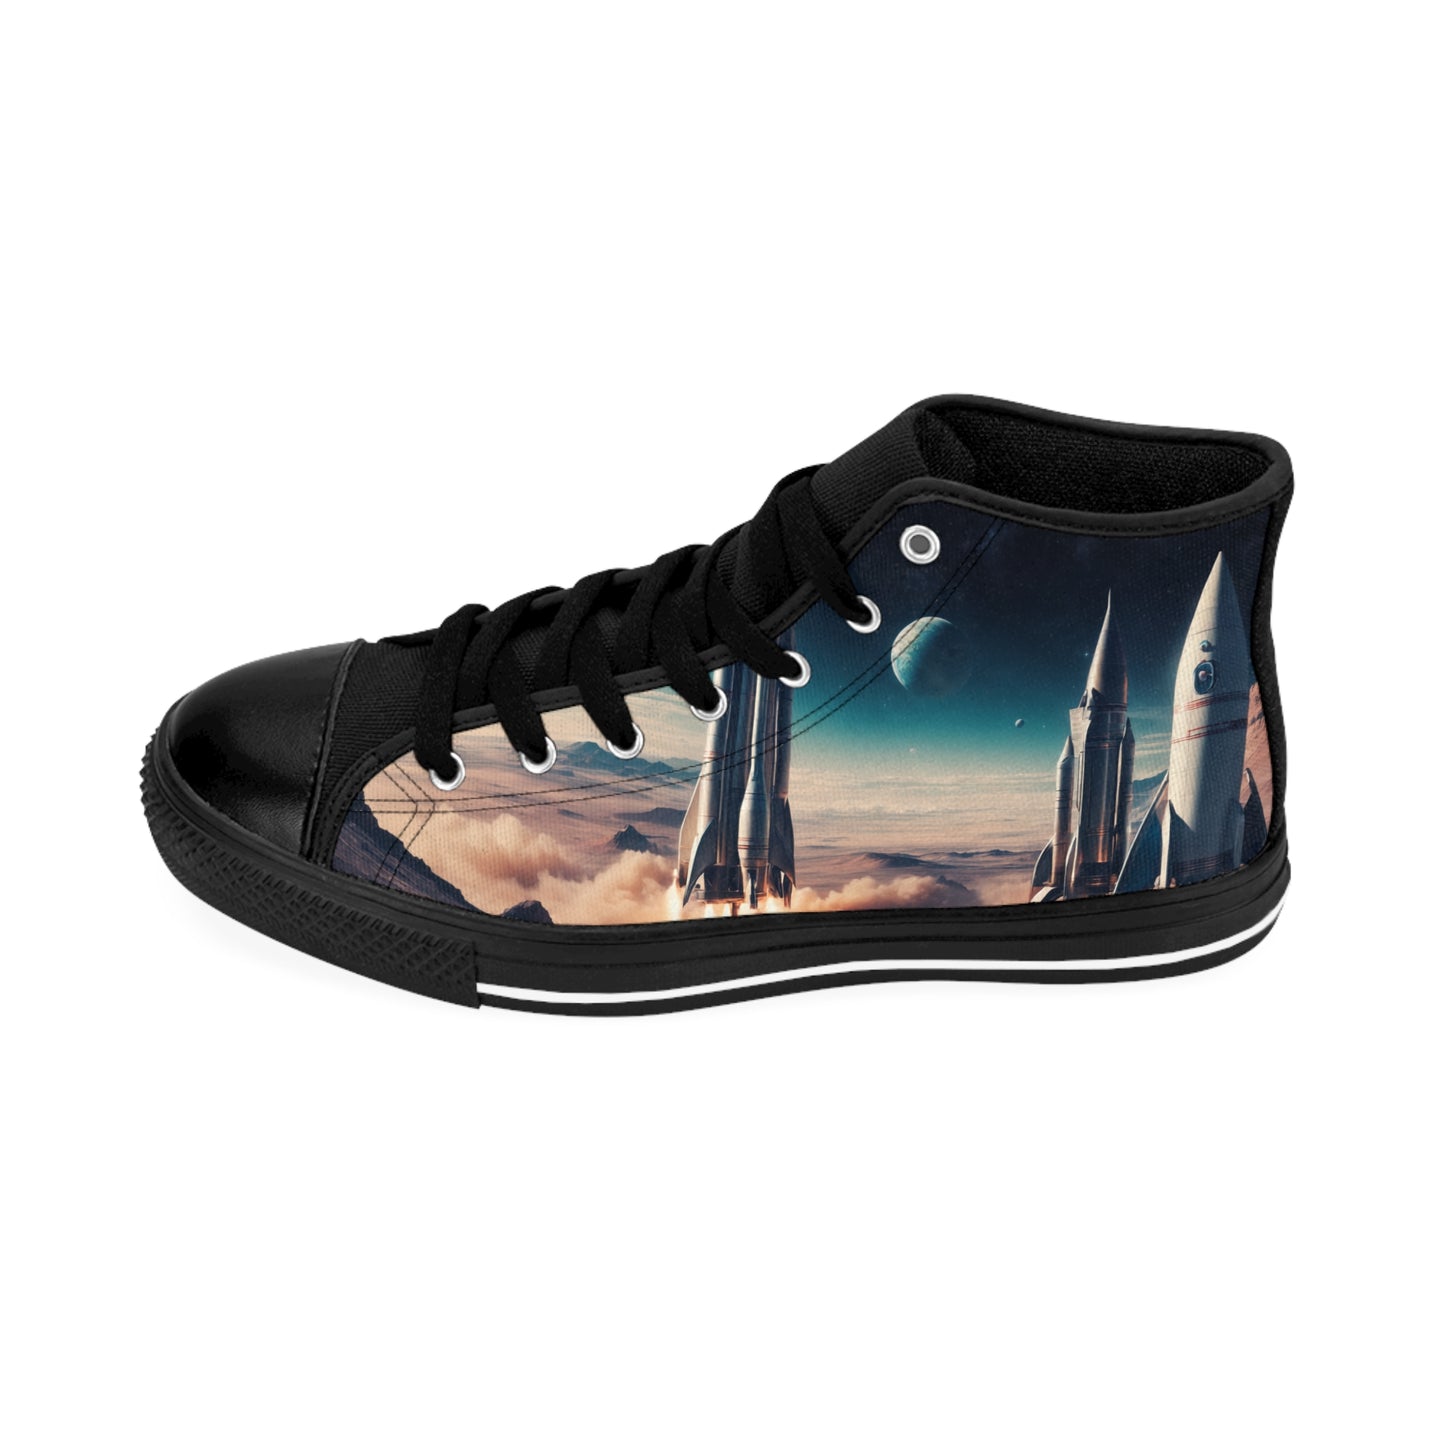 Space Edition | Men's Classic Sneakers